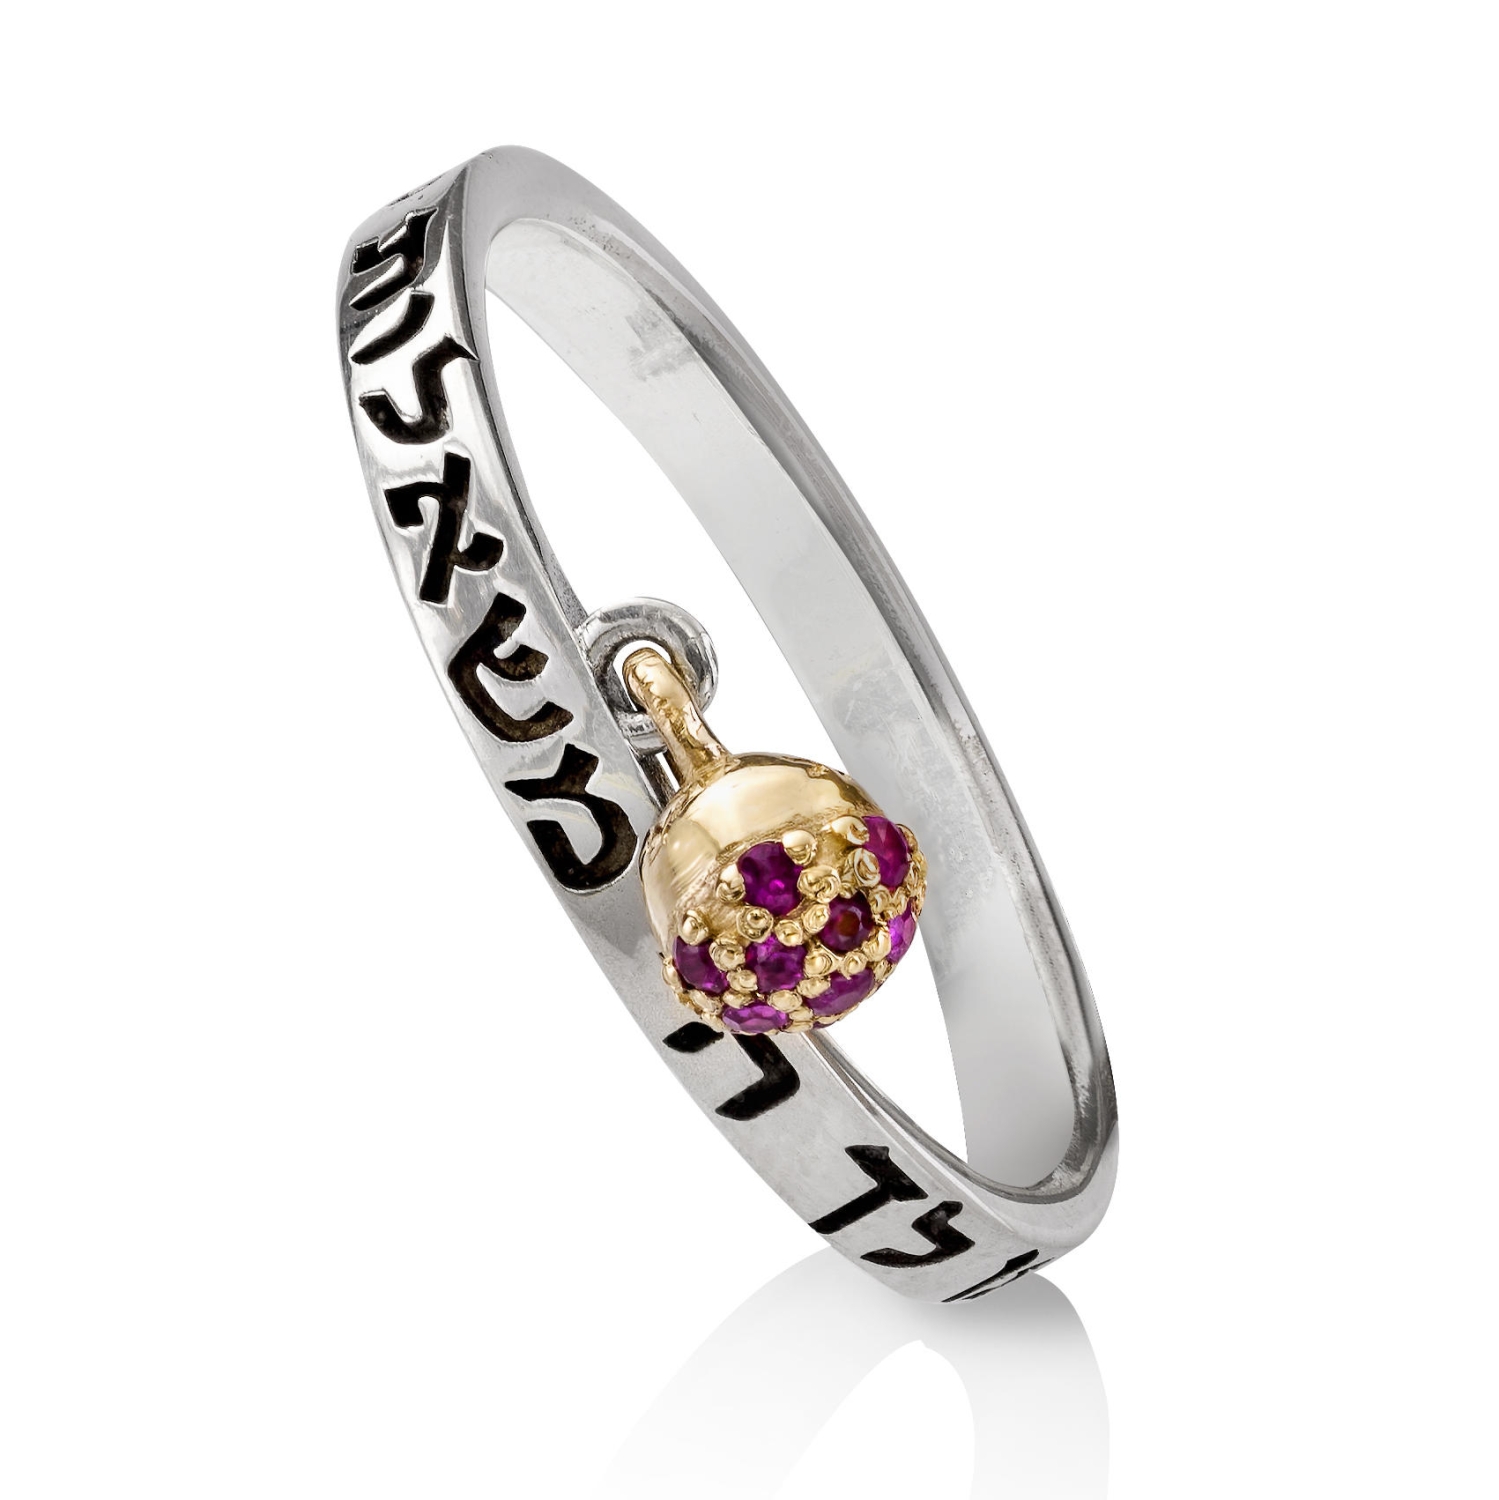 Sterling Silver Orin Ring with 14K Gold Pomegranate and Rubies - 1